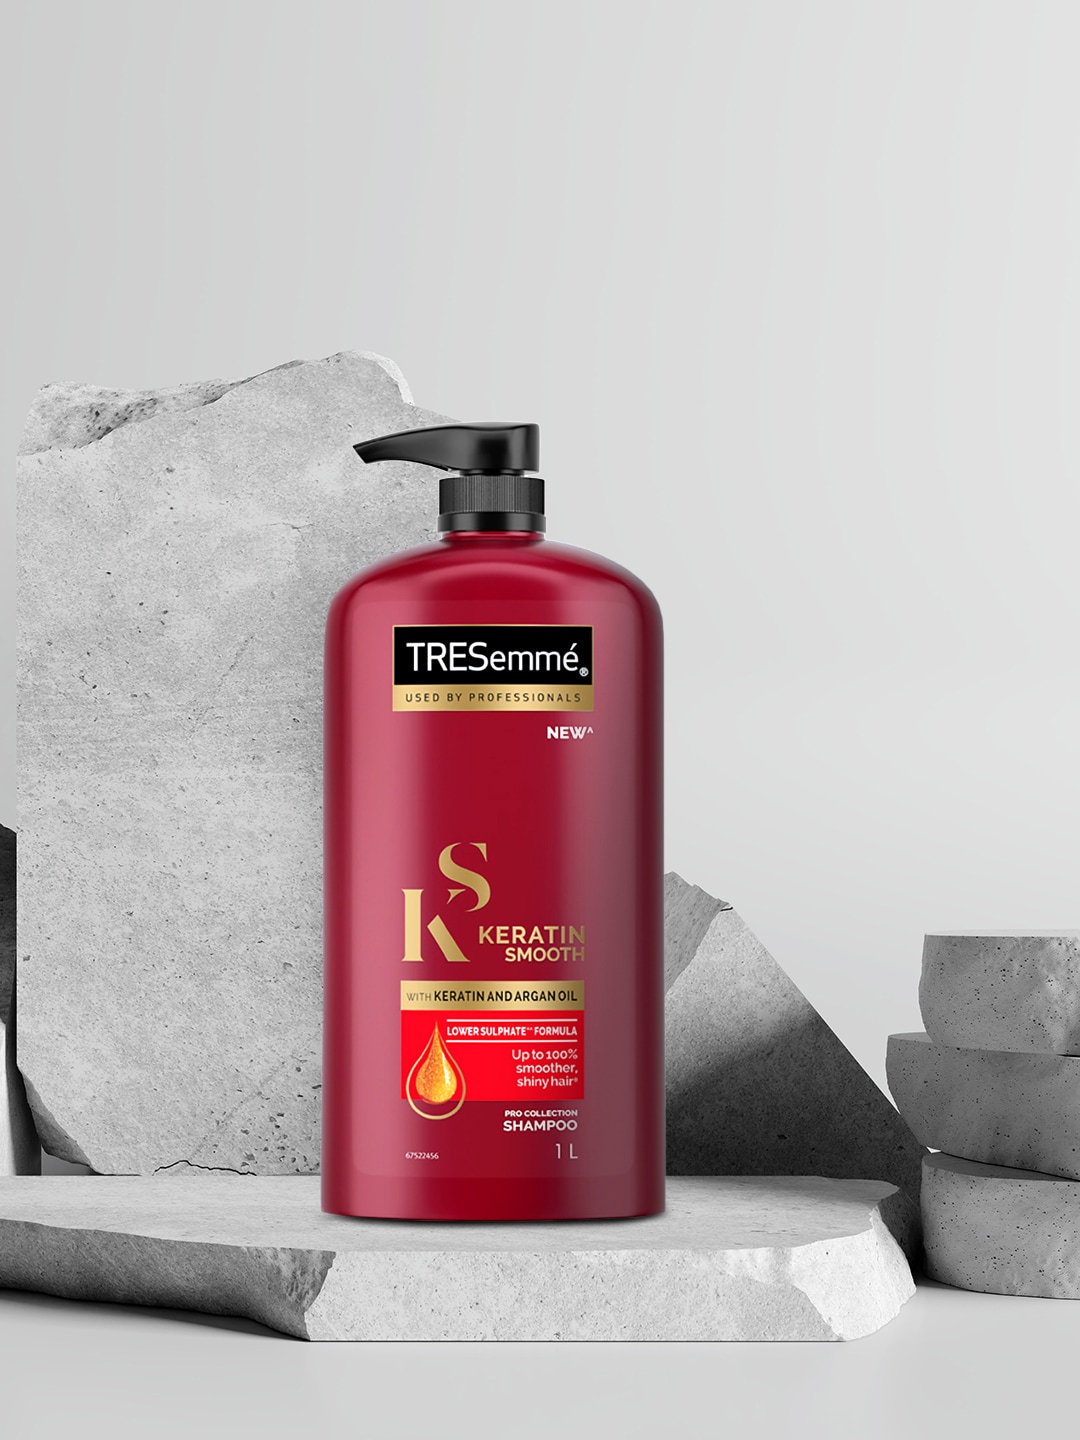 TRESemme Keratin Smooth Shampoo with Argan Oil - 1L Price in India